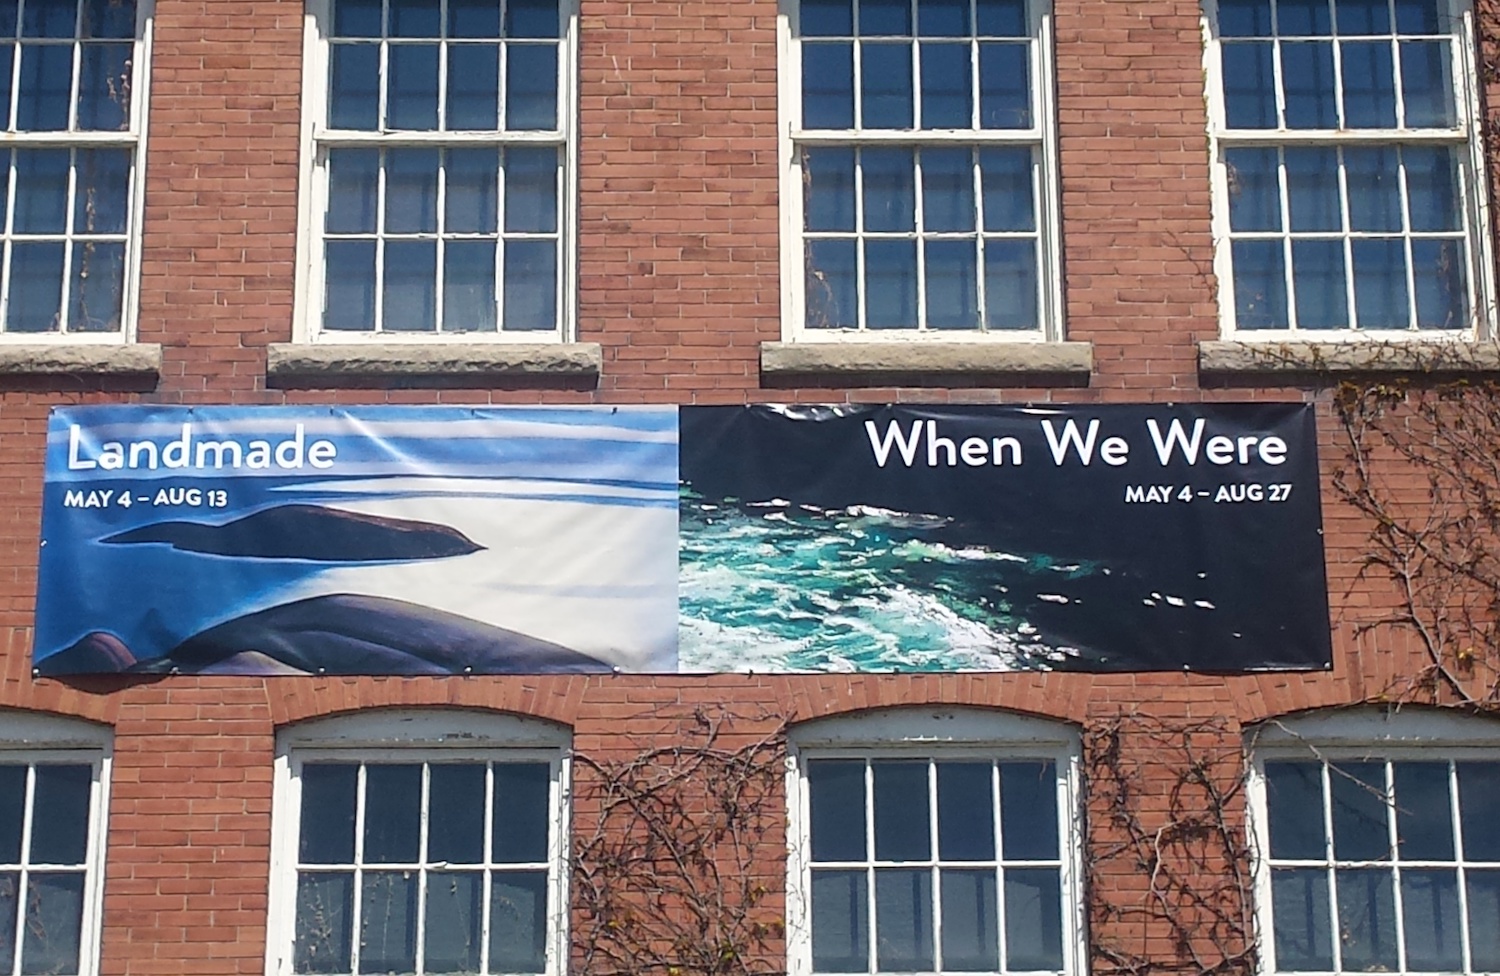 Jessica Masters, When We Were Banner at the AGG, 2017. The banner uses a cropping of my work and Lawren Harris’s.